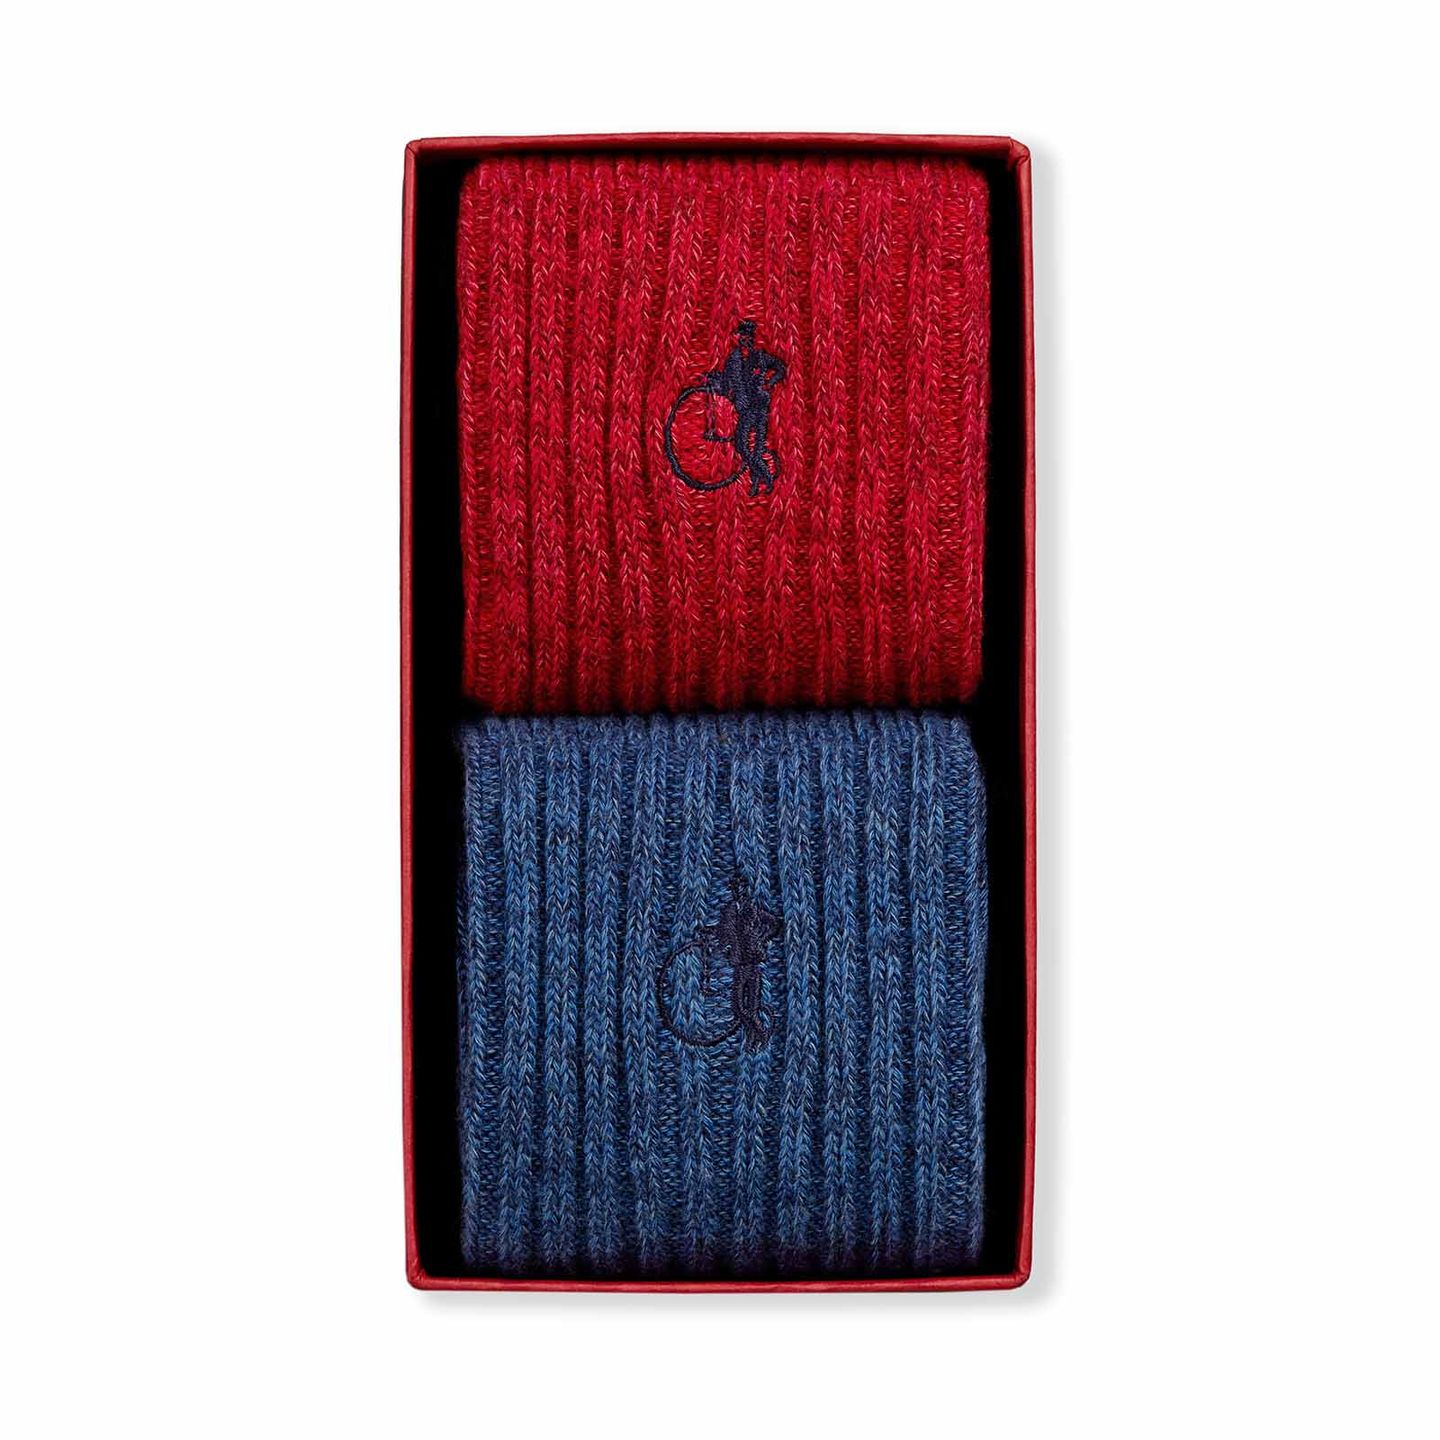 2 pair of red and blue socks in a box